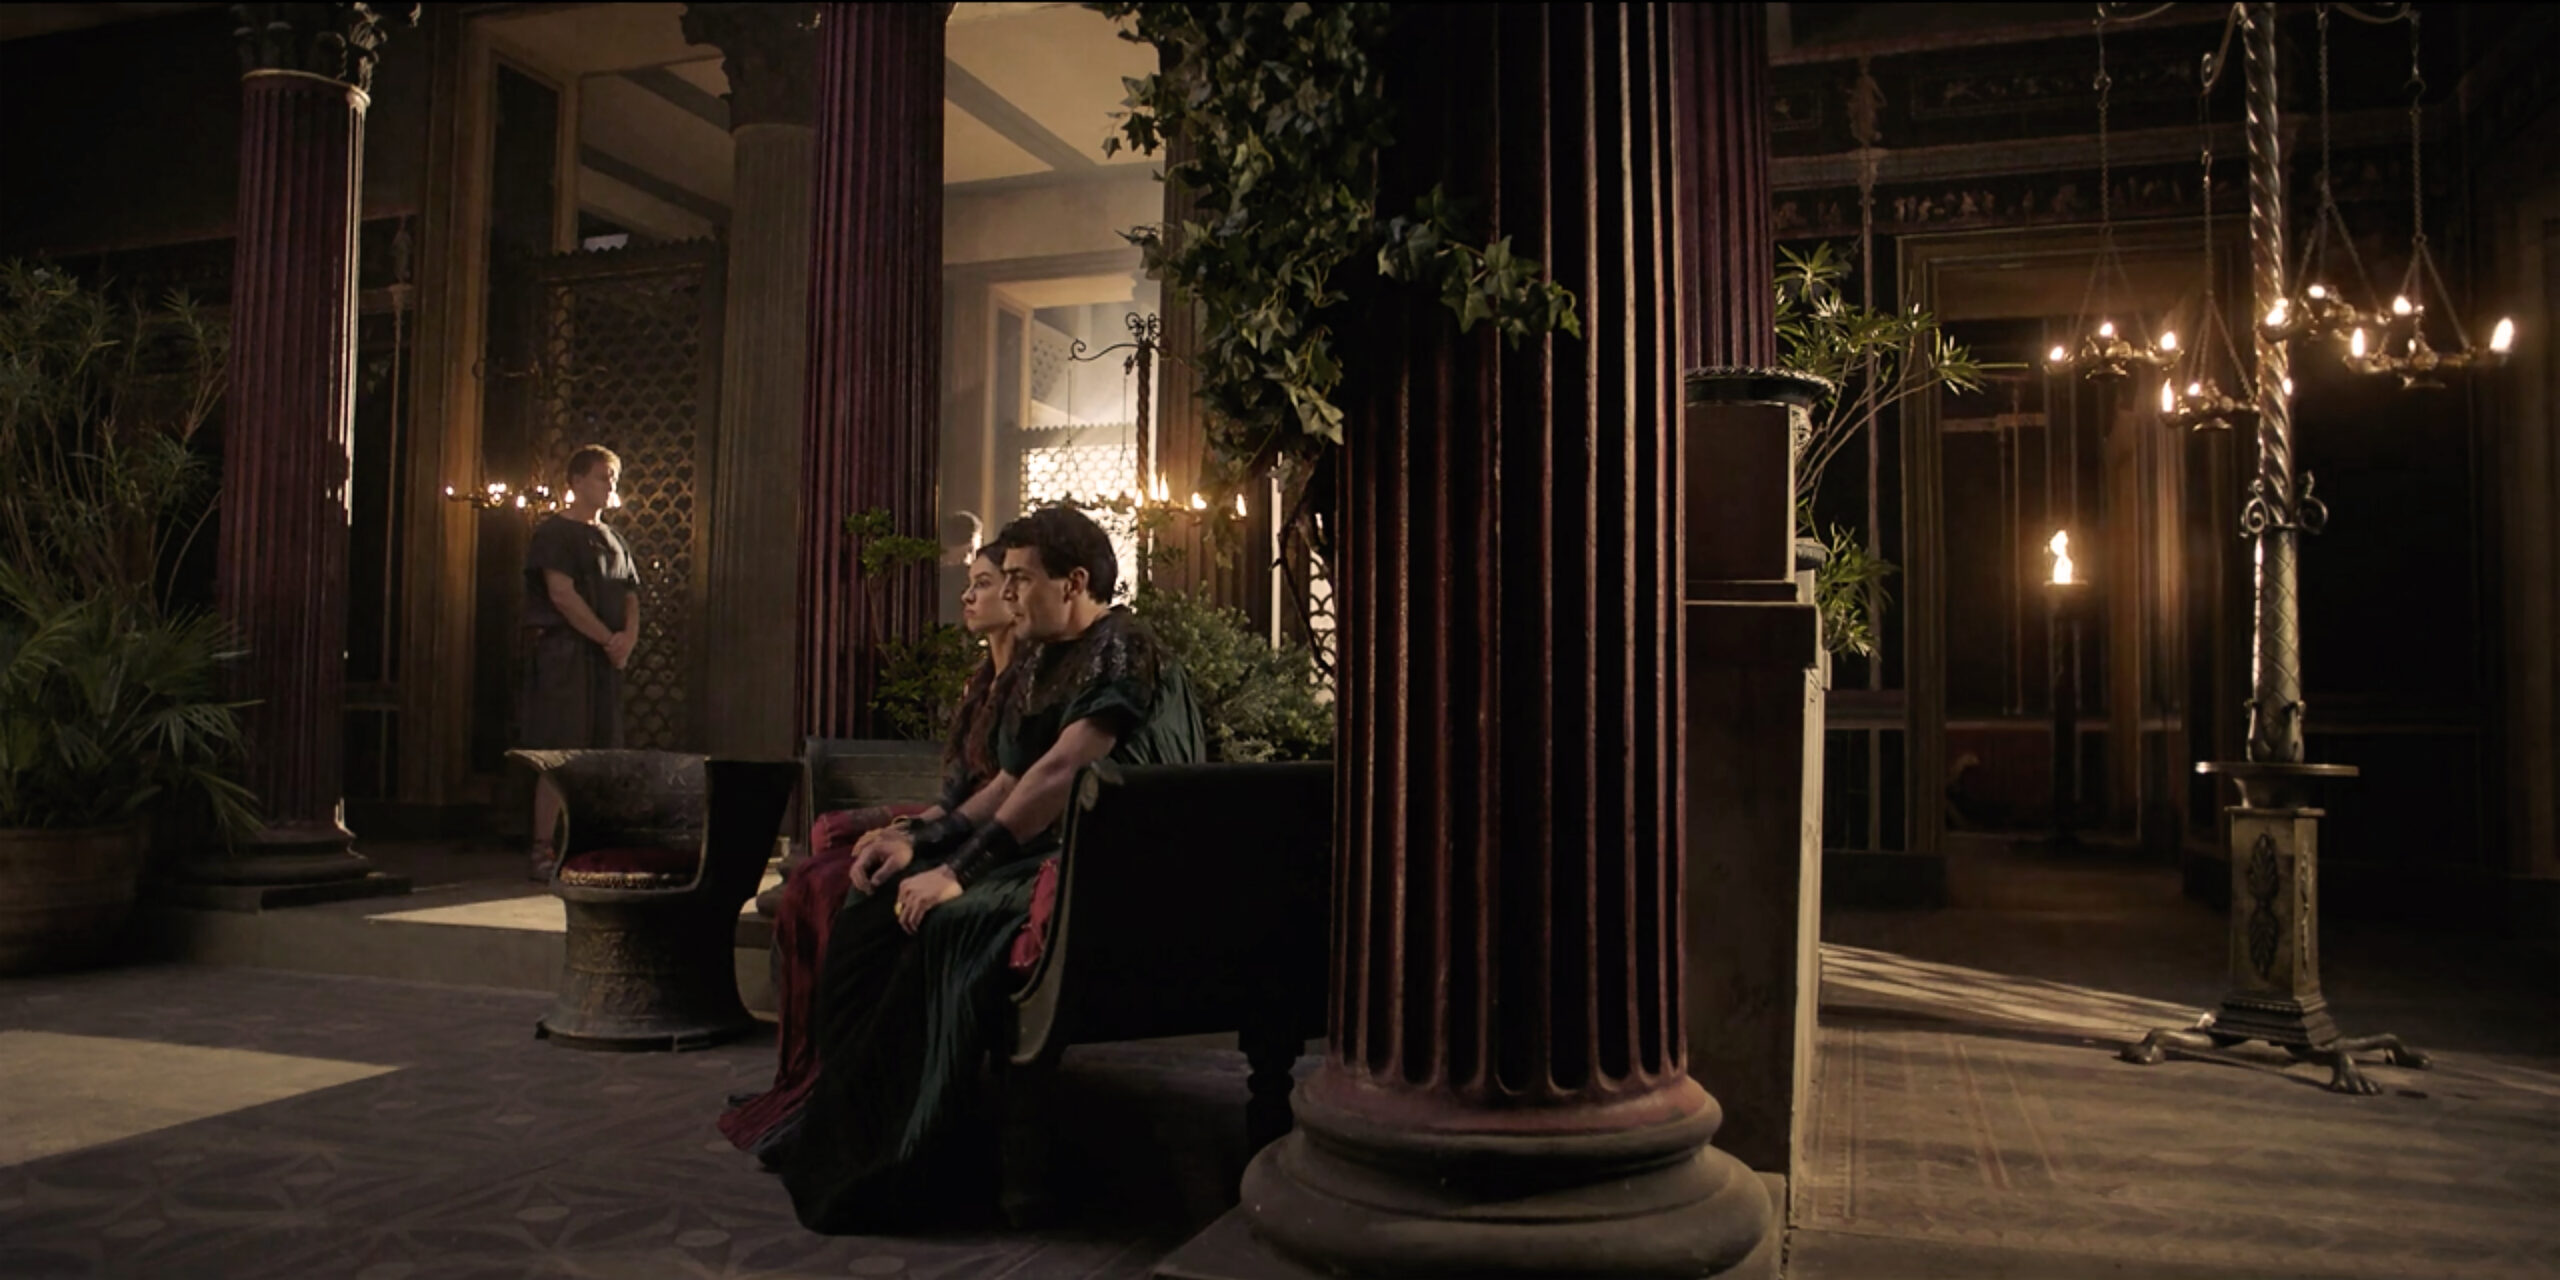 DOMINA - Production Design by Luca Tranchino - Int. House of Gaius, Stage Set - ©2021 - Sky Atlantic